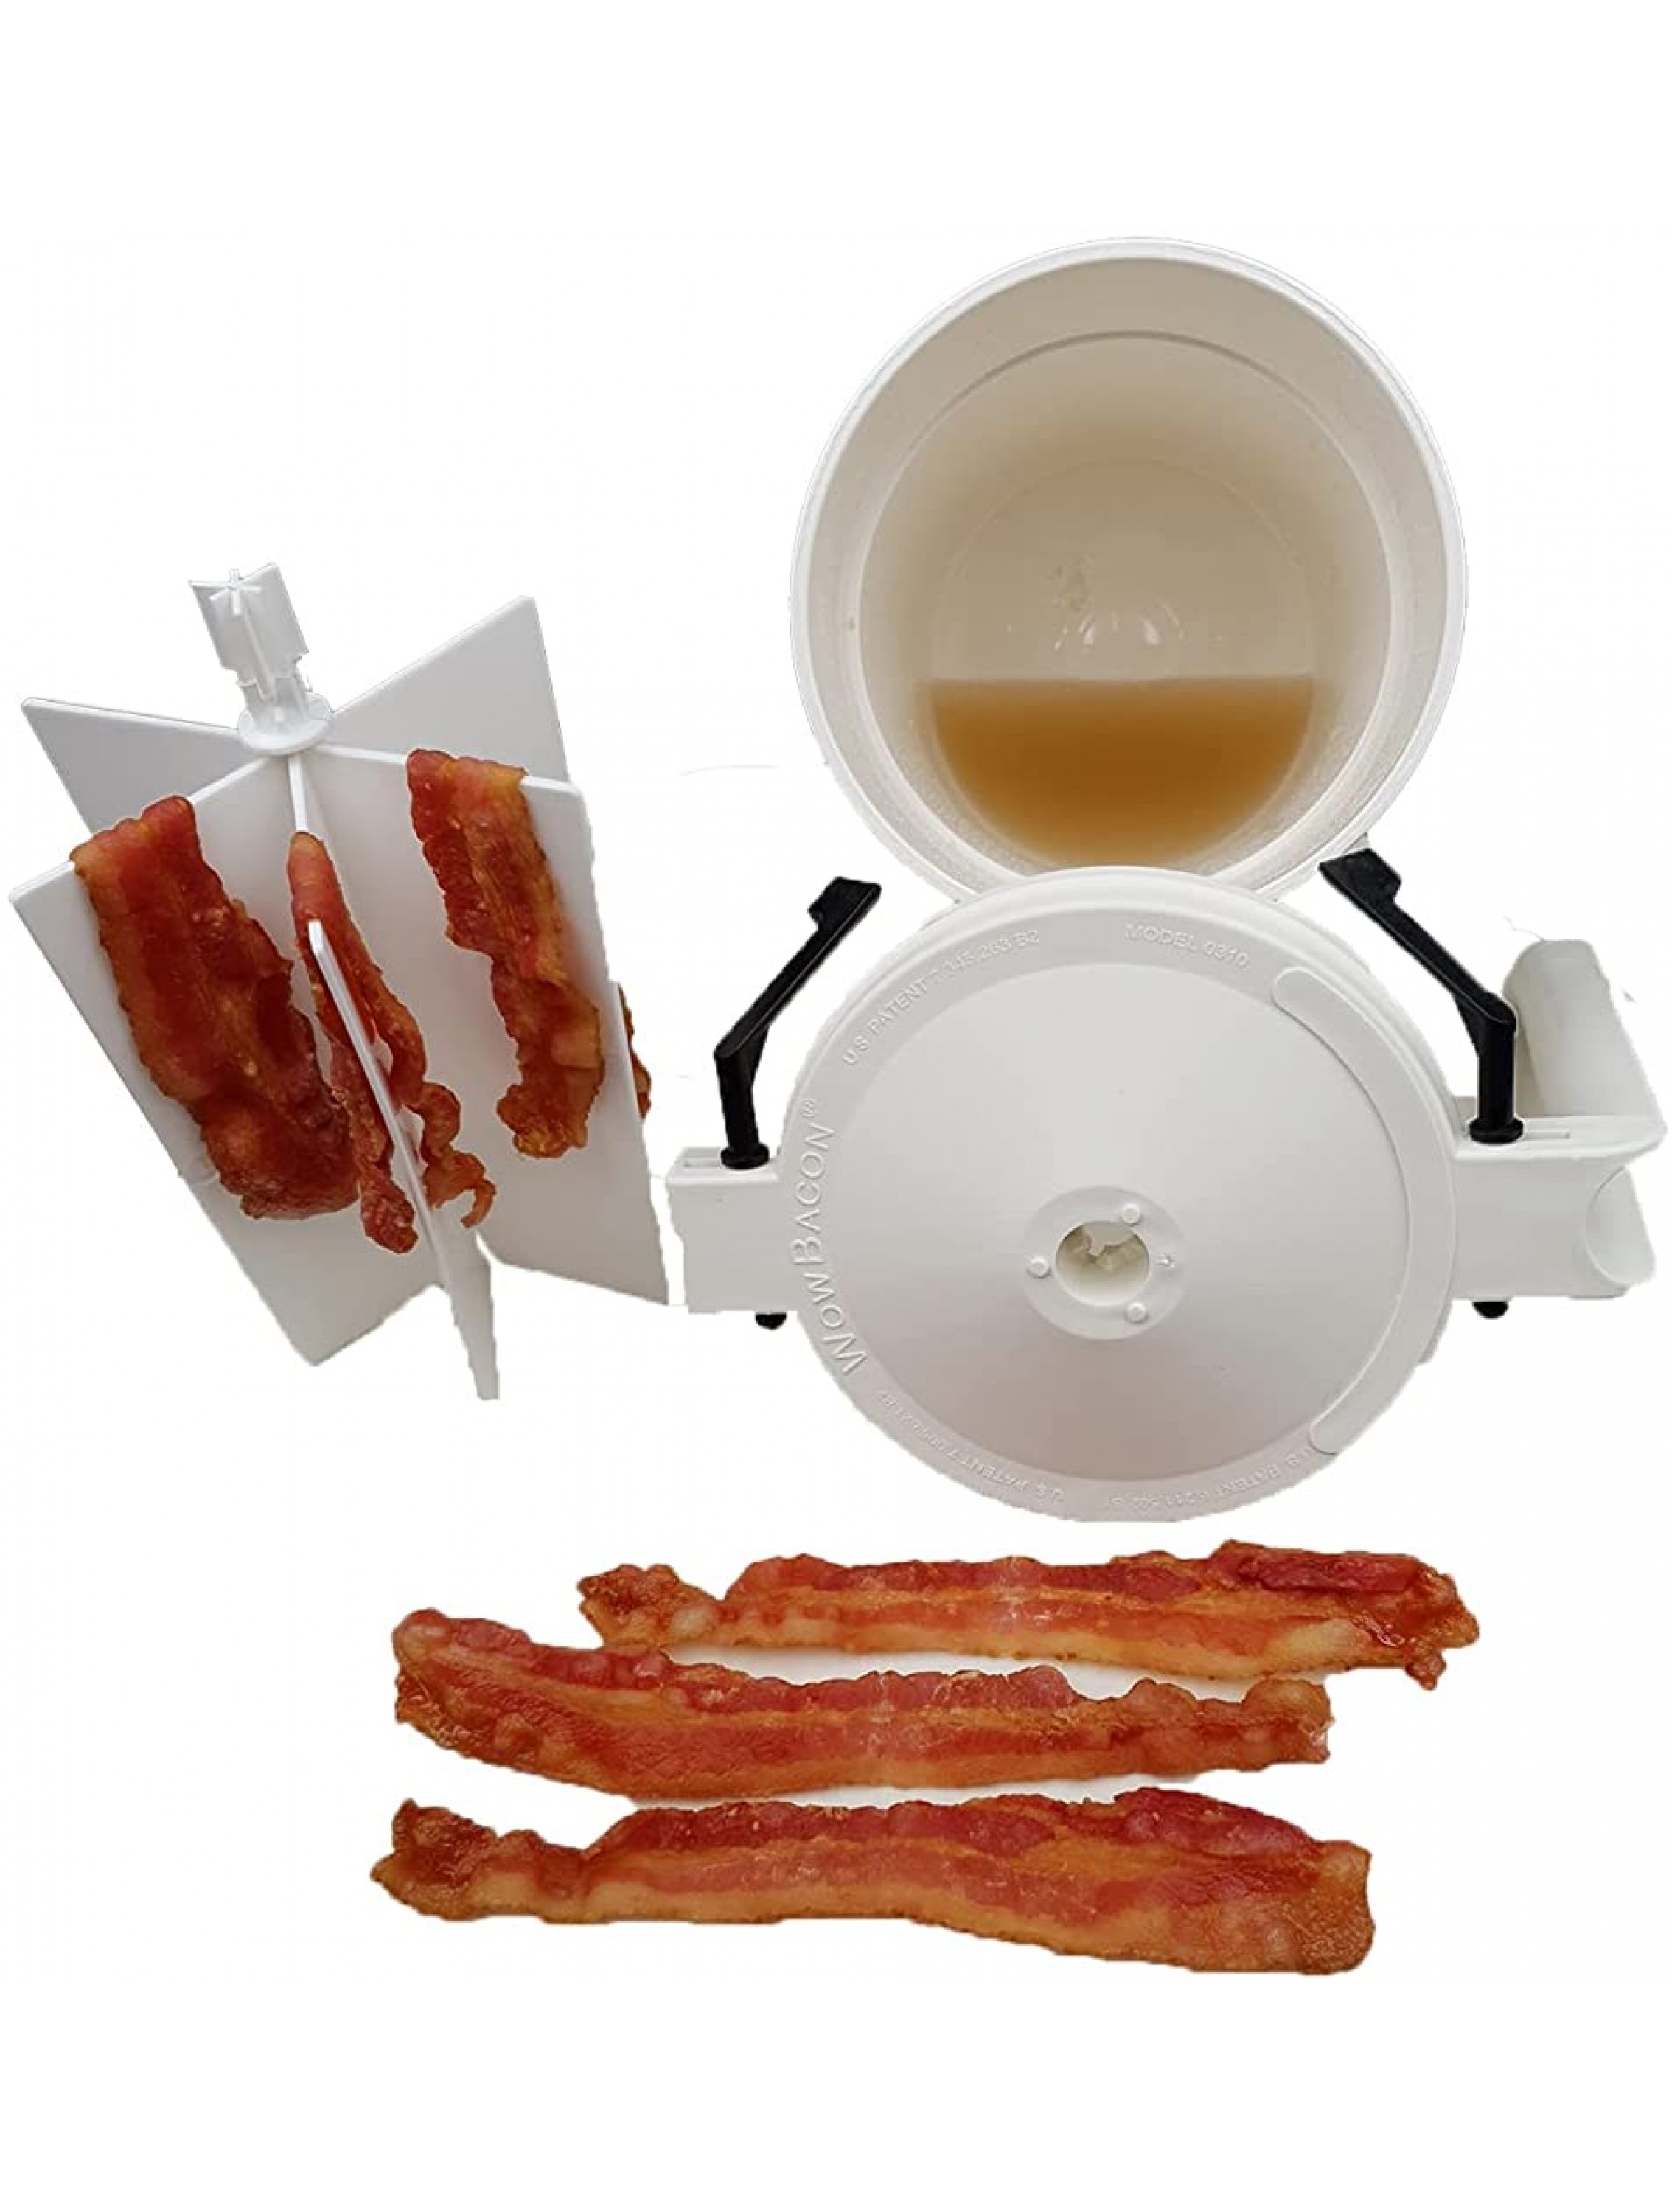 Wow Bacon Microwave Cooker Stress Free Bacon in a Stress Filled World!! - B7MWOCU9H